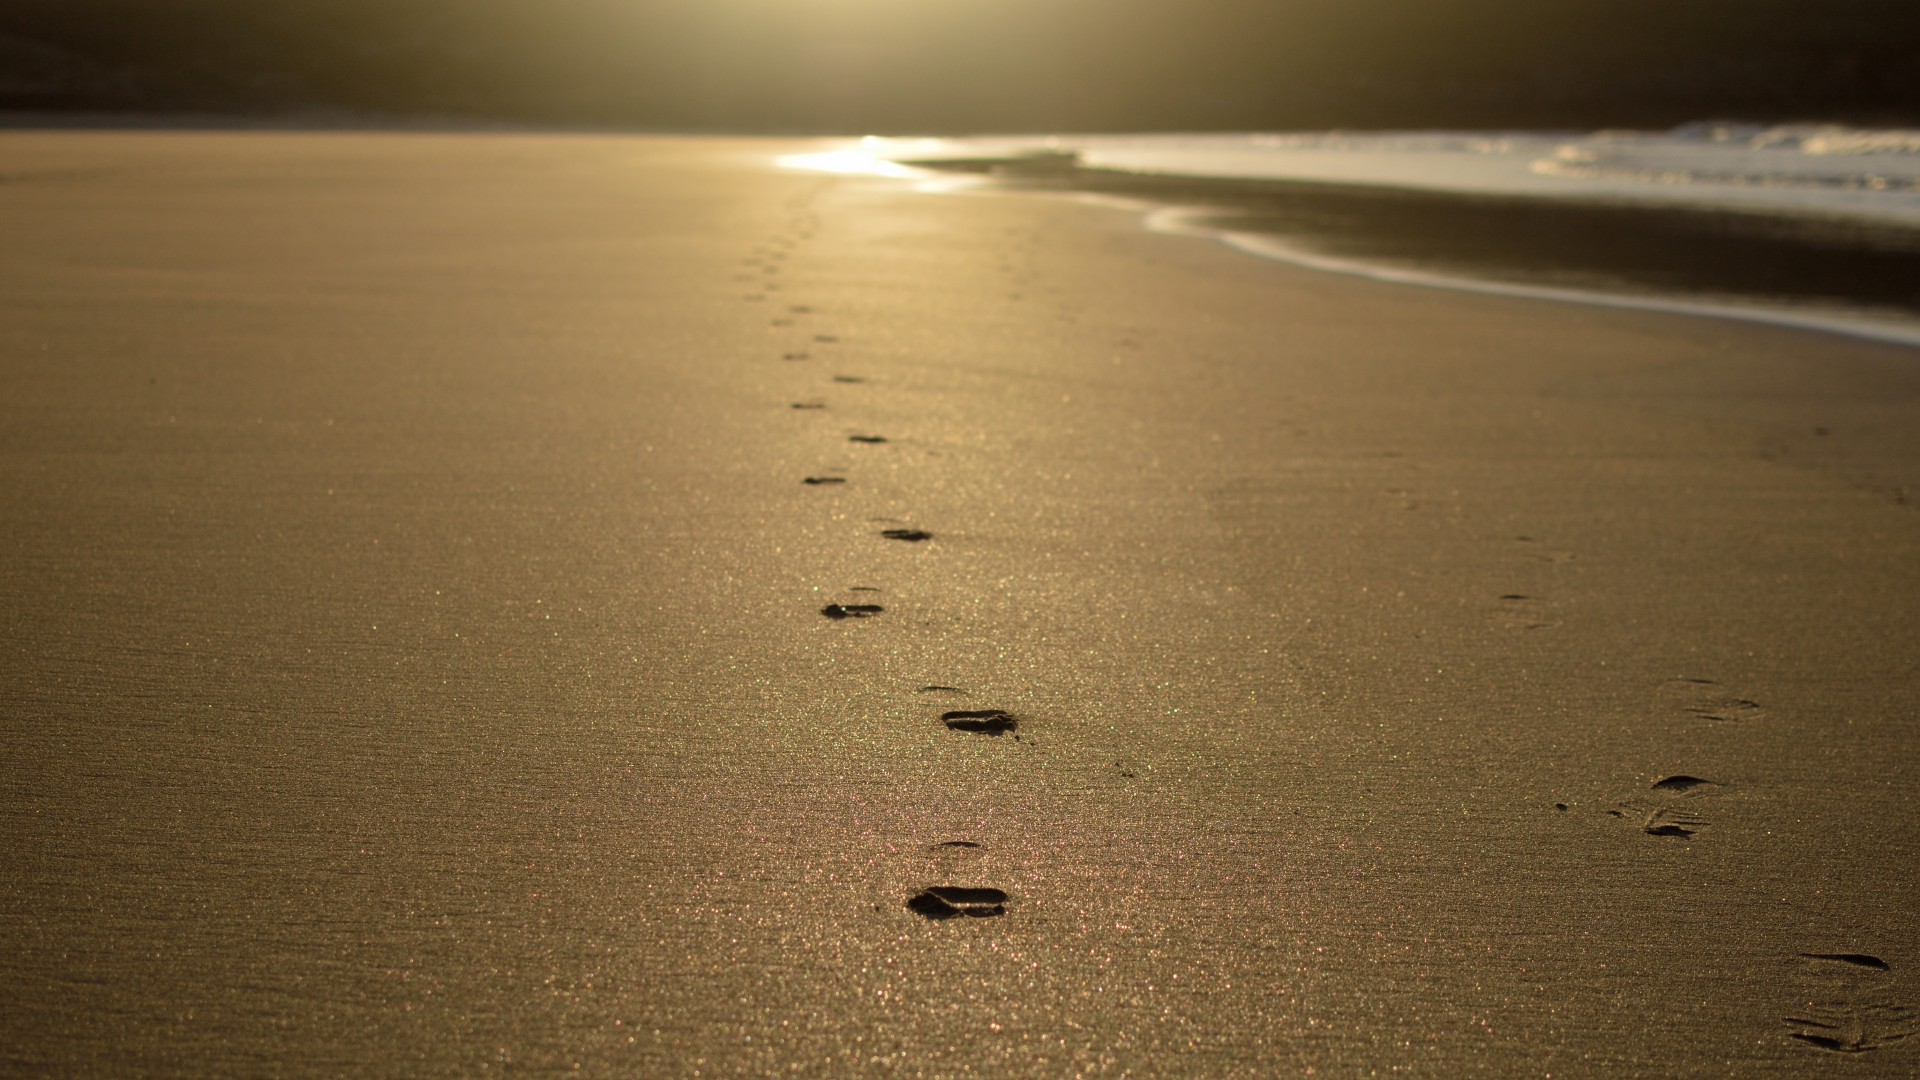 Footprints in sand photo